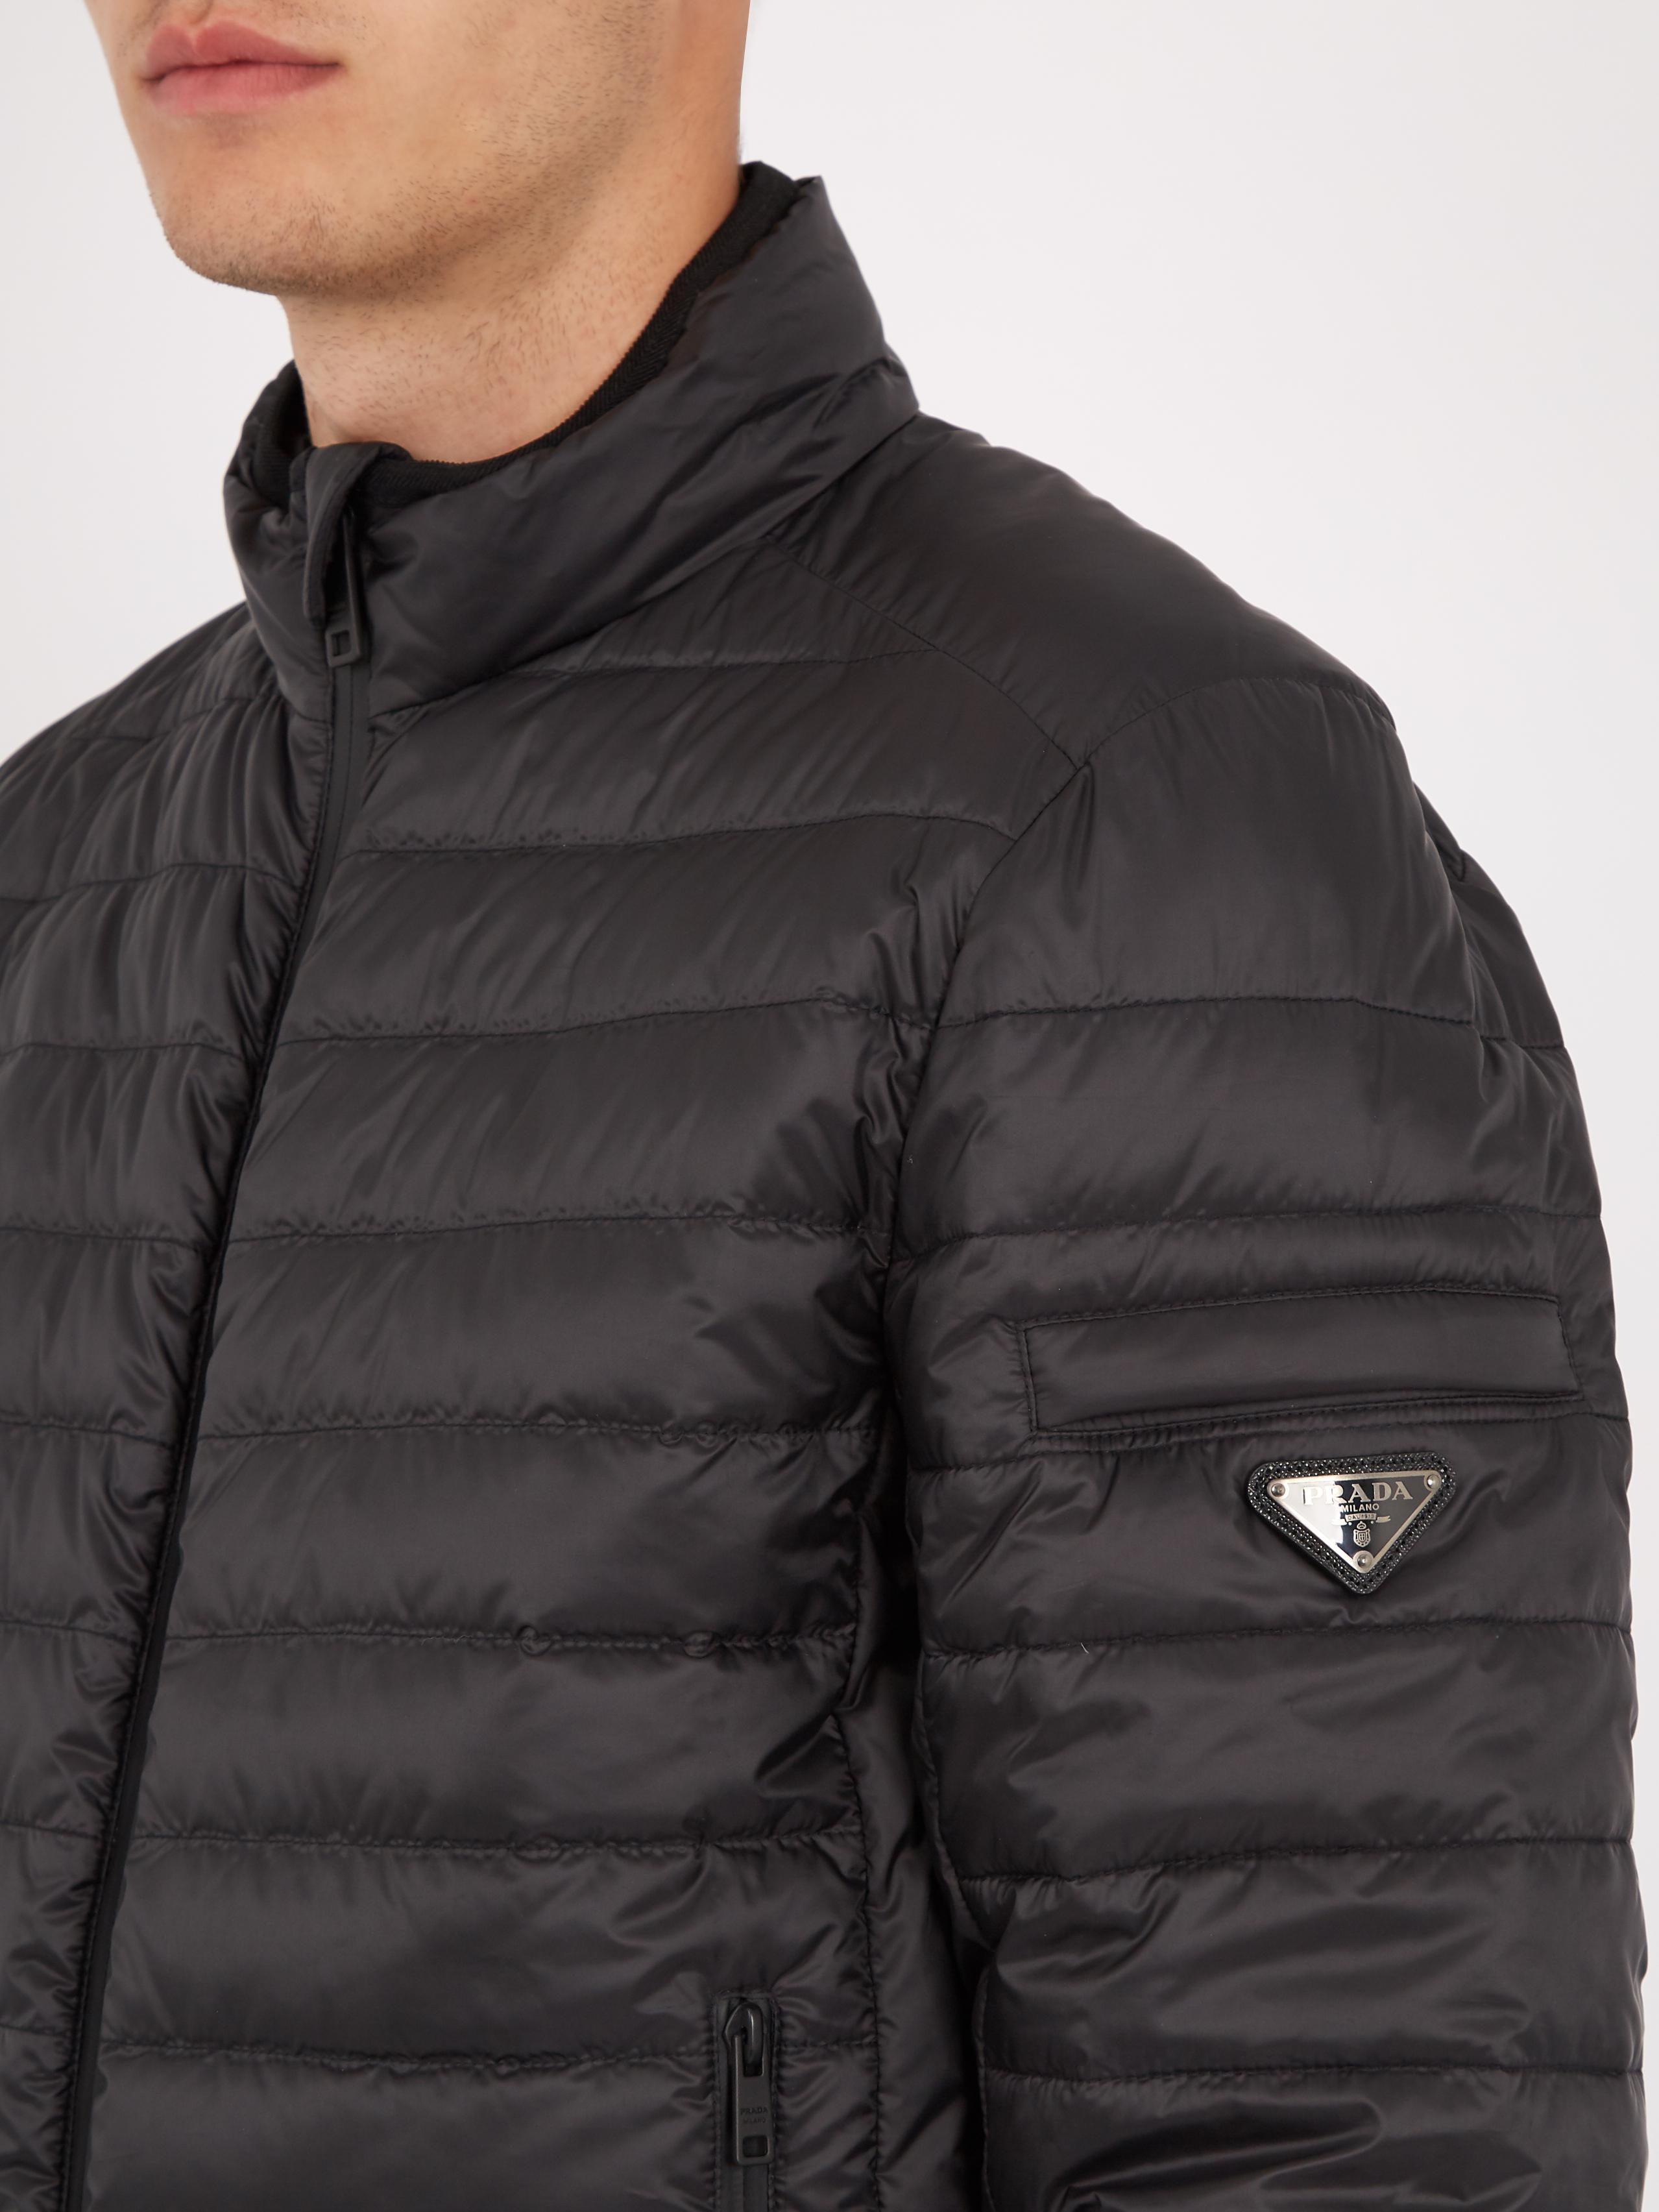 Prada Synthetic Lightweight Quilted Down Jacket in Black for Men 